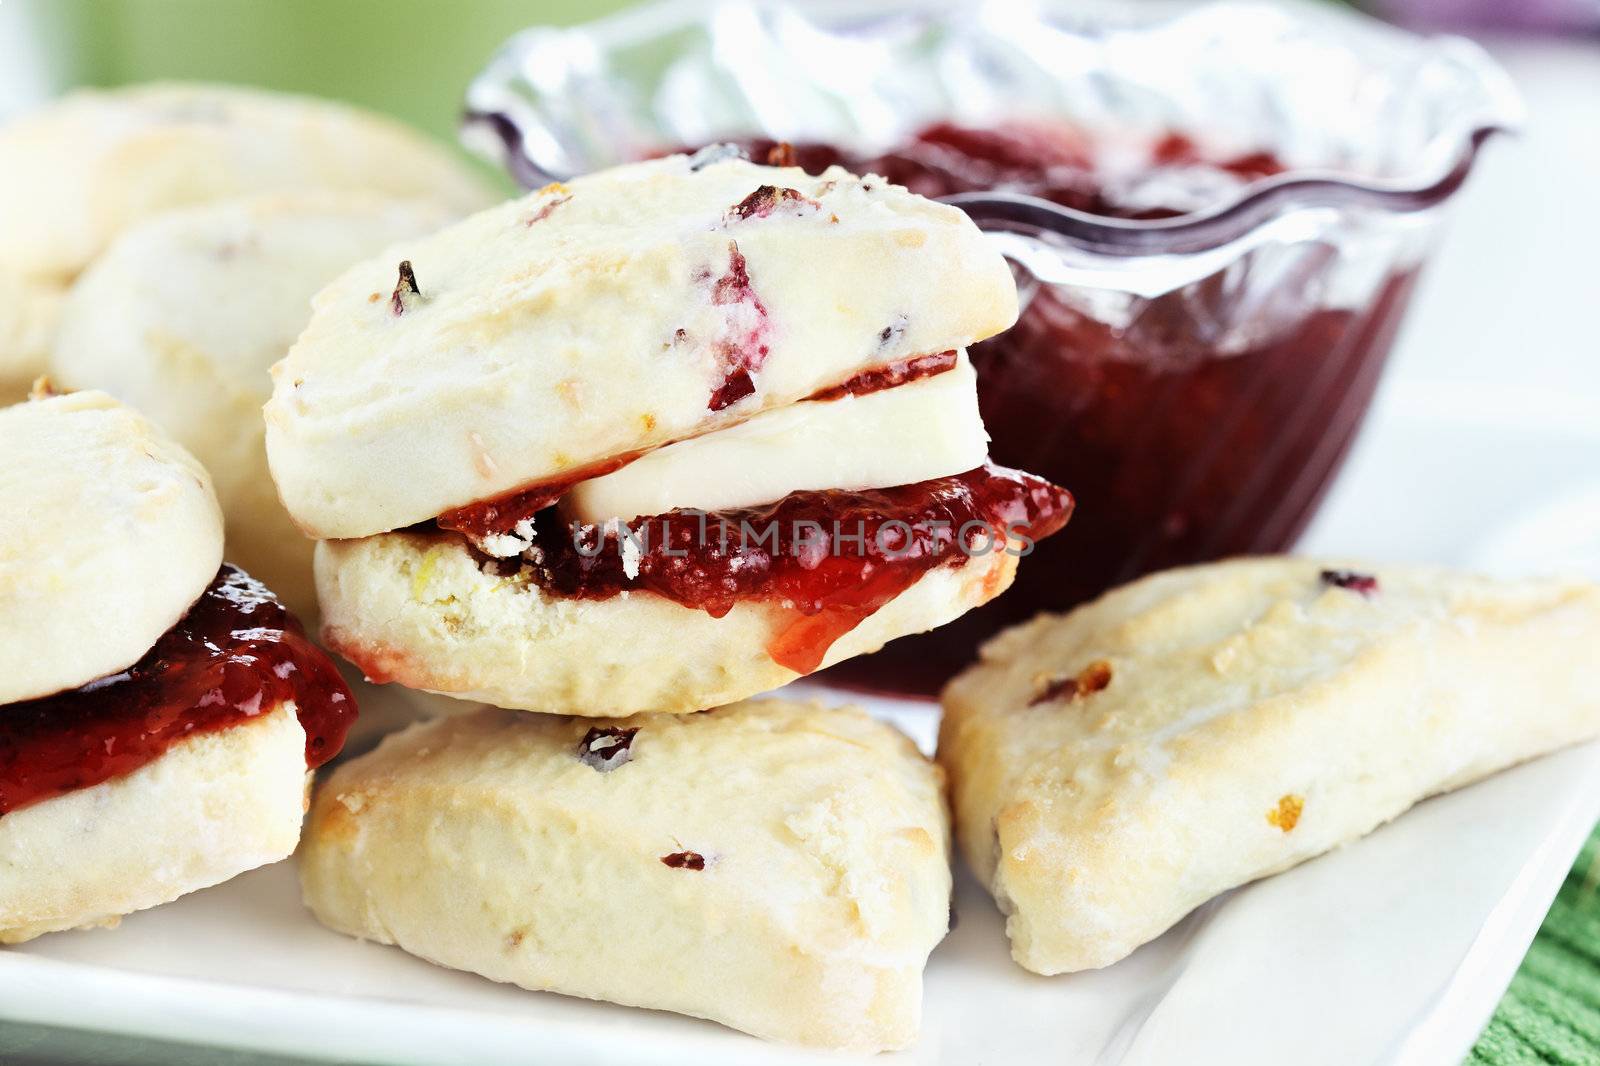 Closeup of freshly baked scones with butter and strawberry preserves. Selective focus with shallow depth of field.